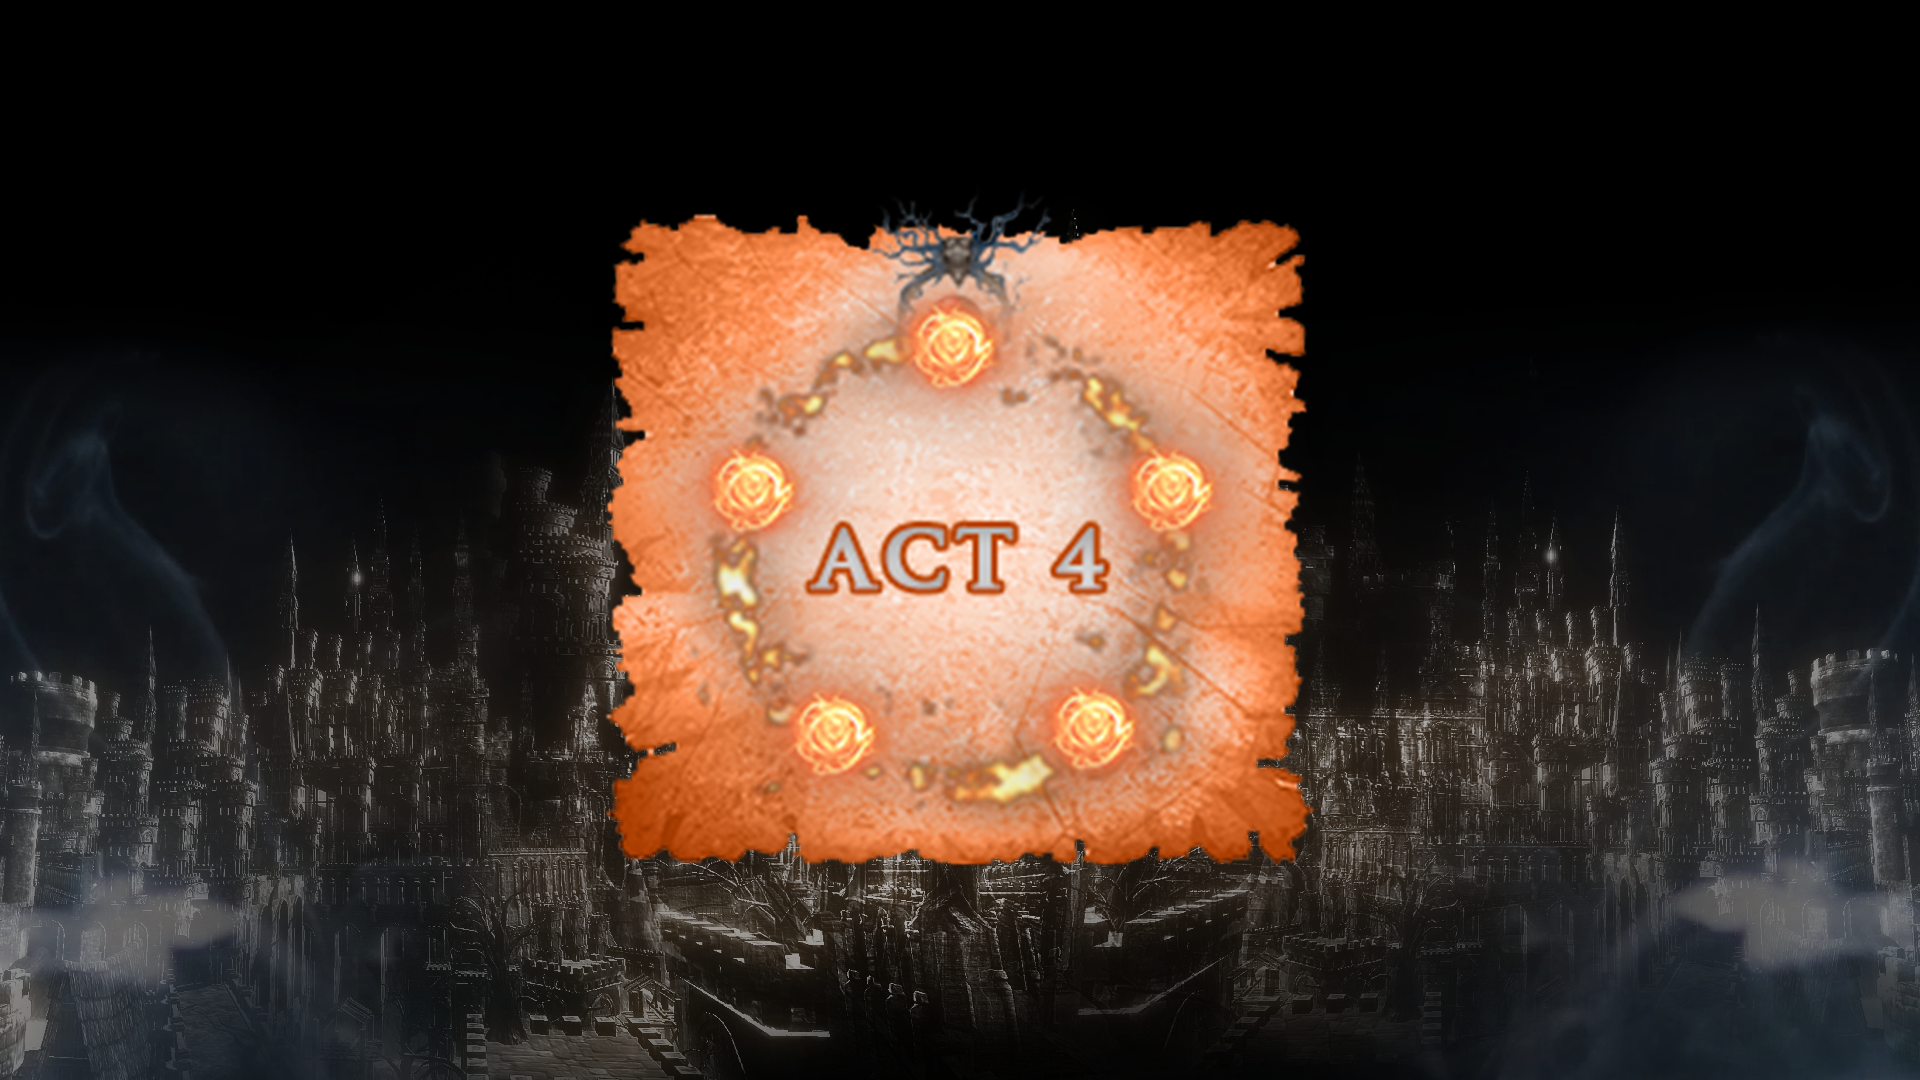 Icon for Act 4 Hard 5 Star